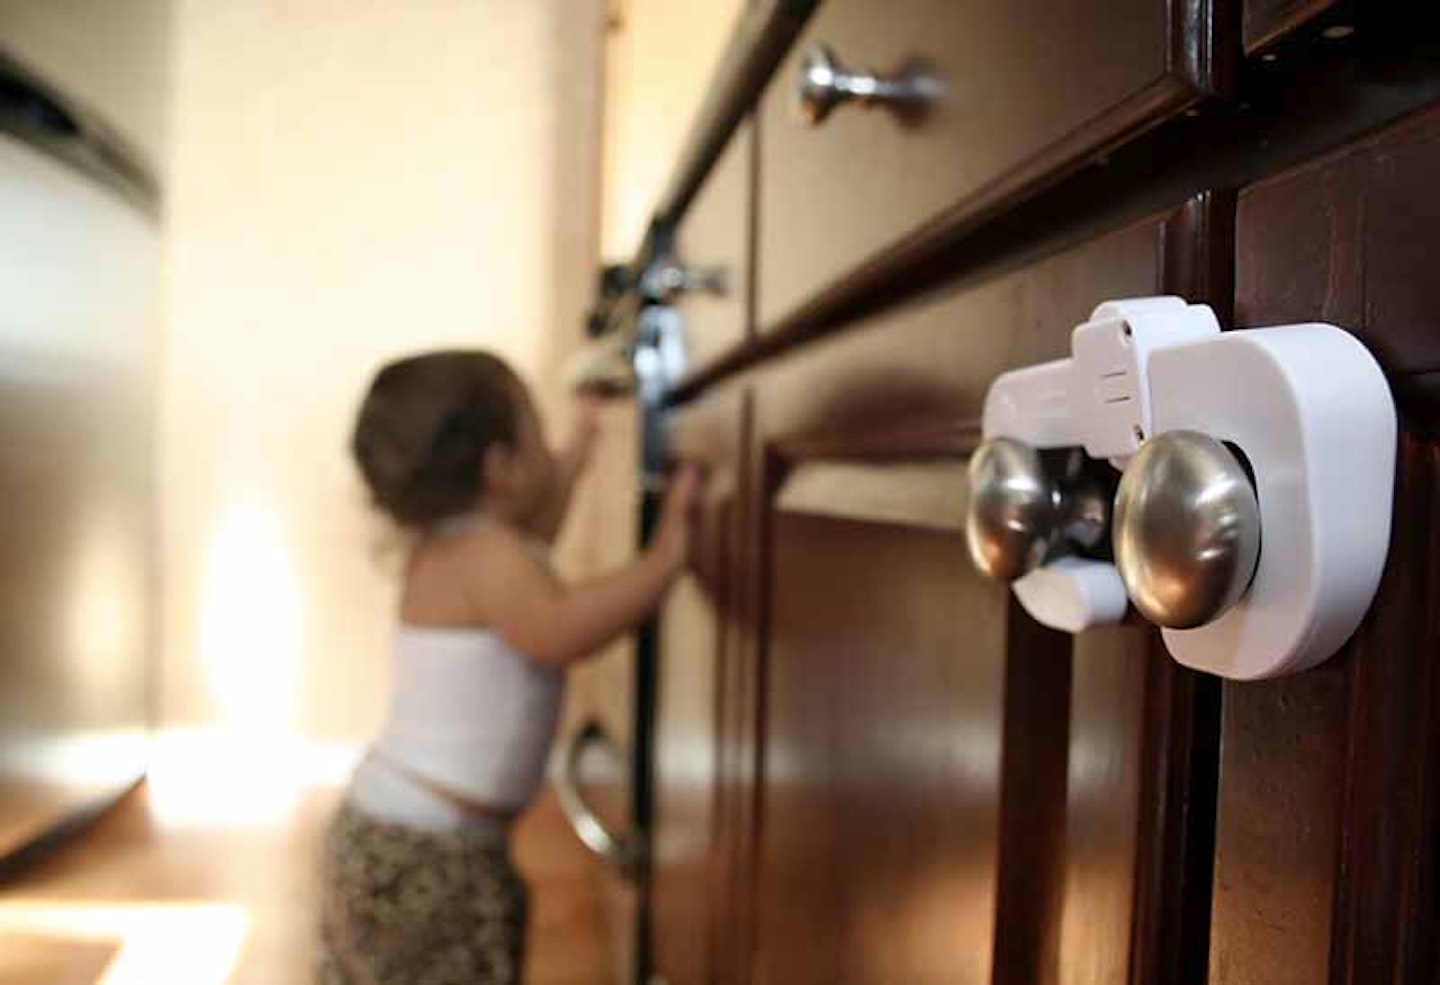 The 5 Best Childproofing Edge Guards